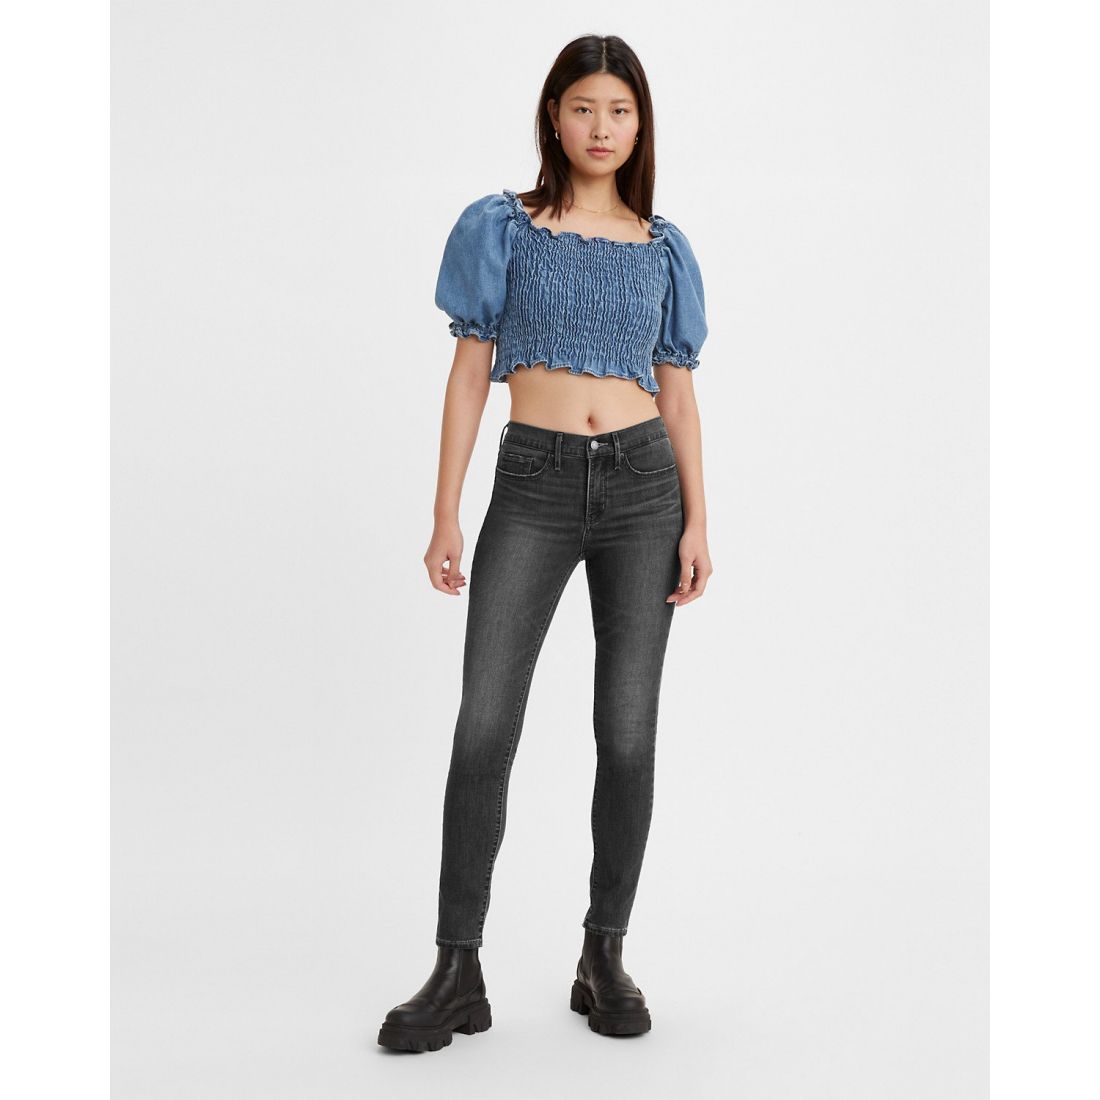 Levi's - Jeans skinny '311 Shaping' pour Femmes